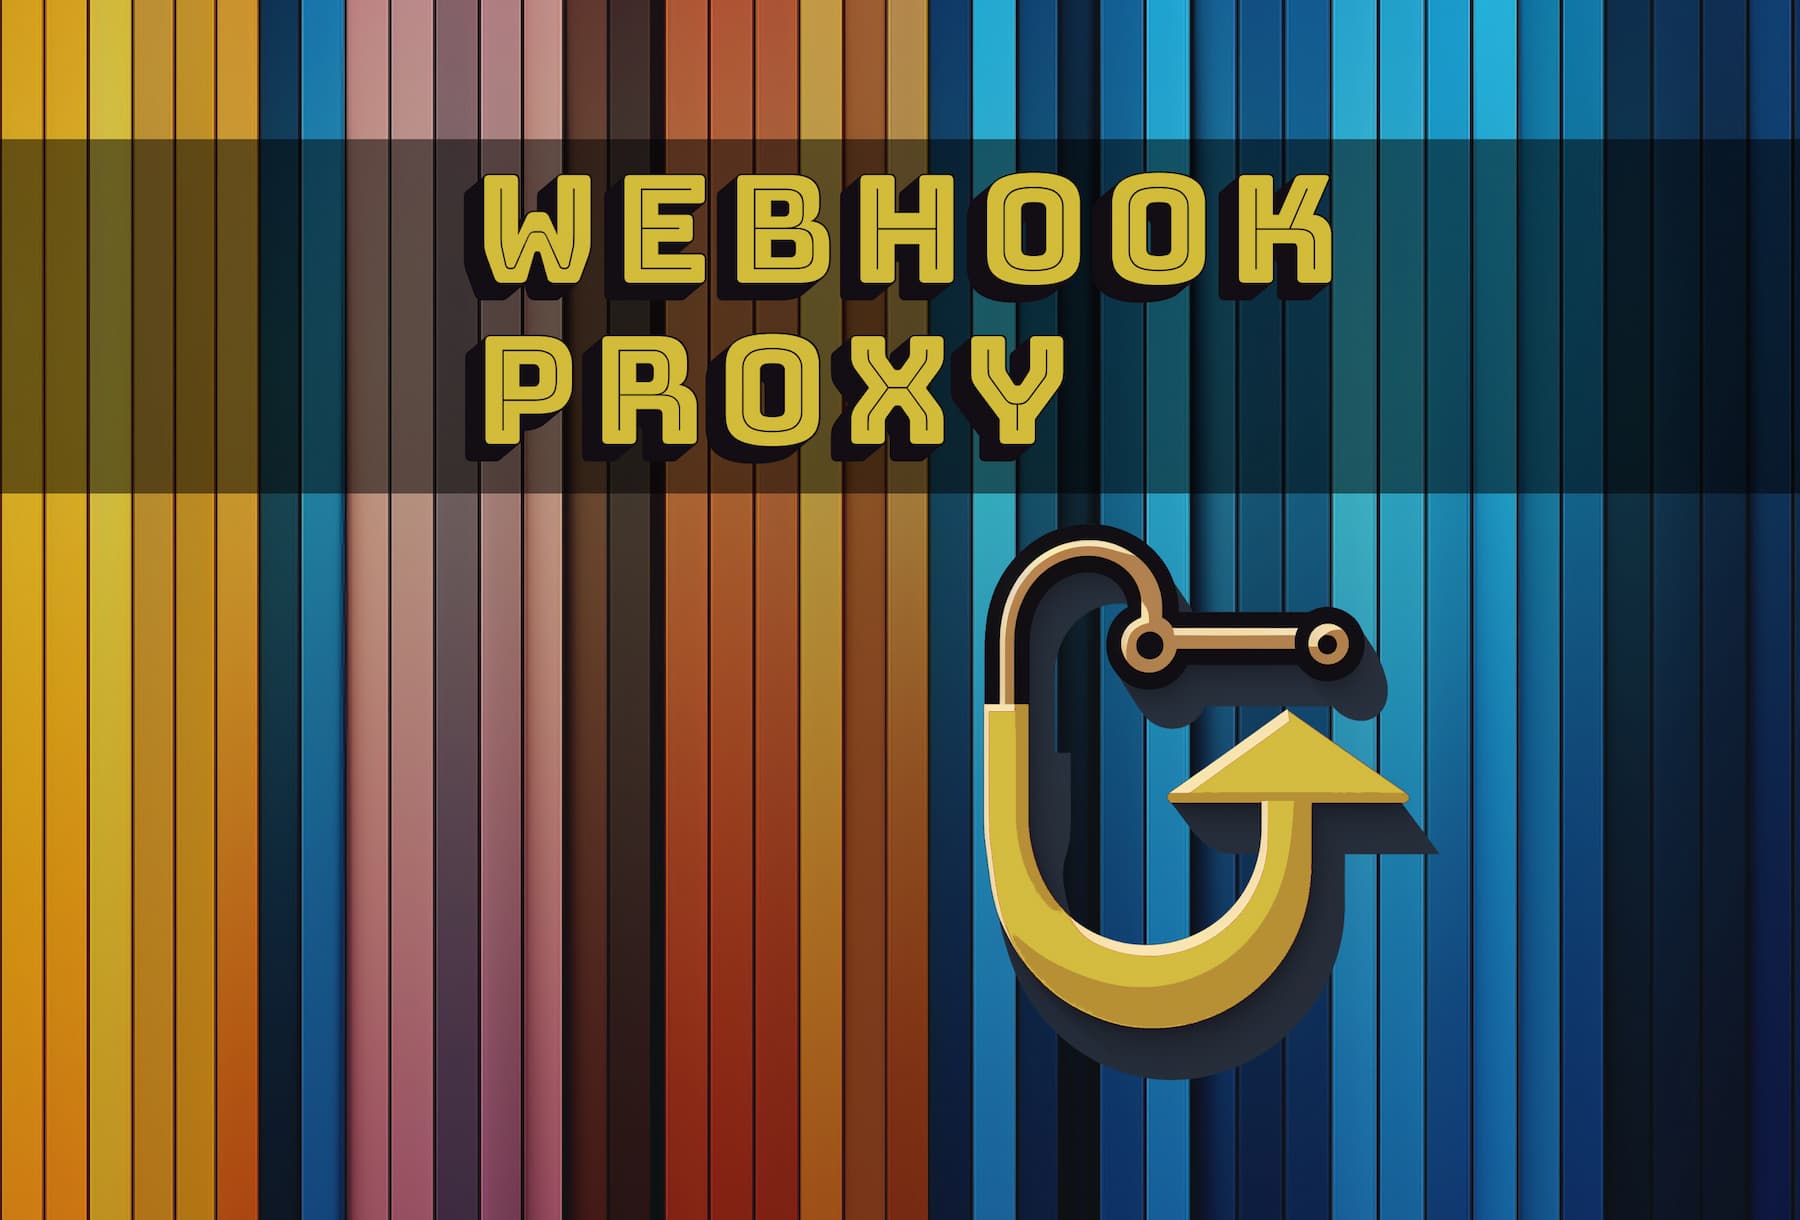 Webhook proxy - a blue and yellow striped background with an arrow pointing to the word webhook proxy.